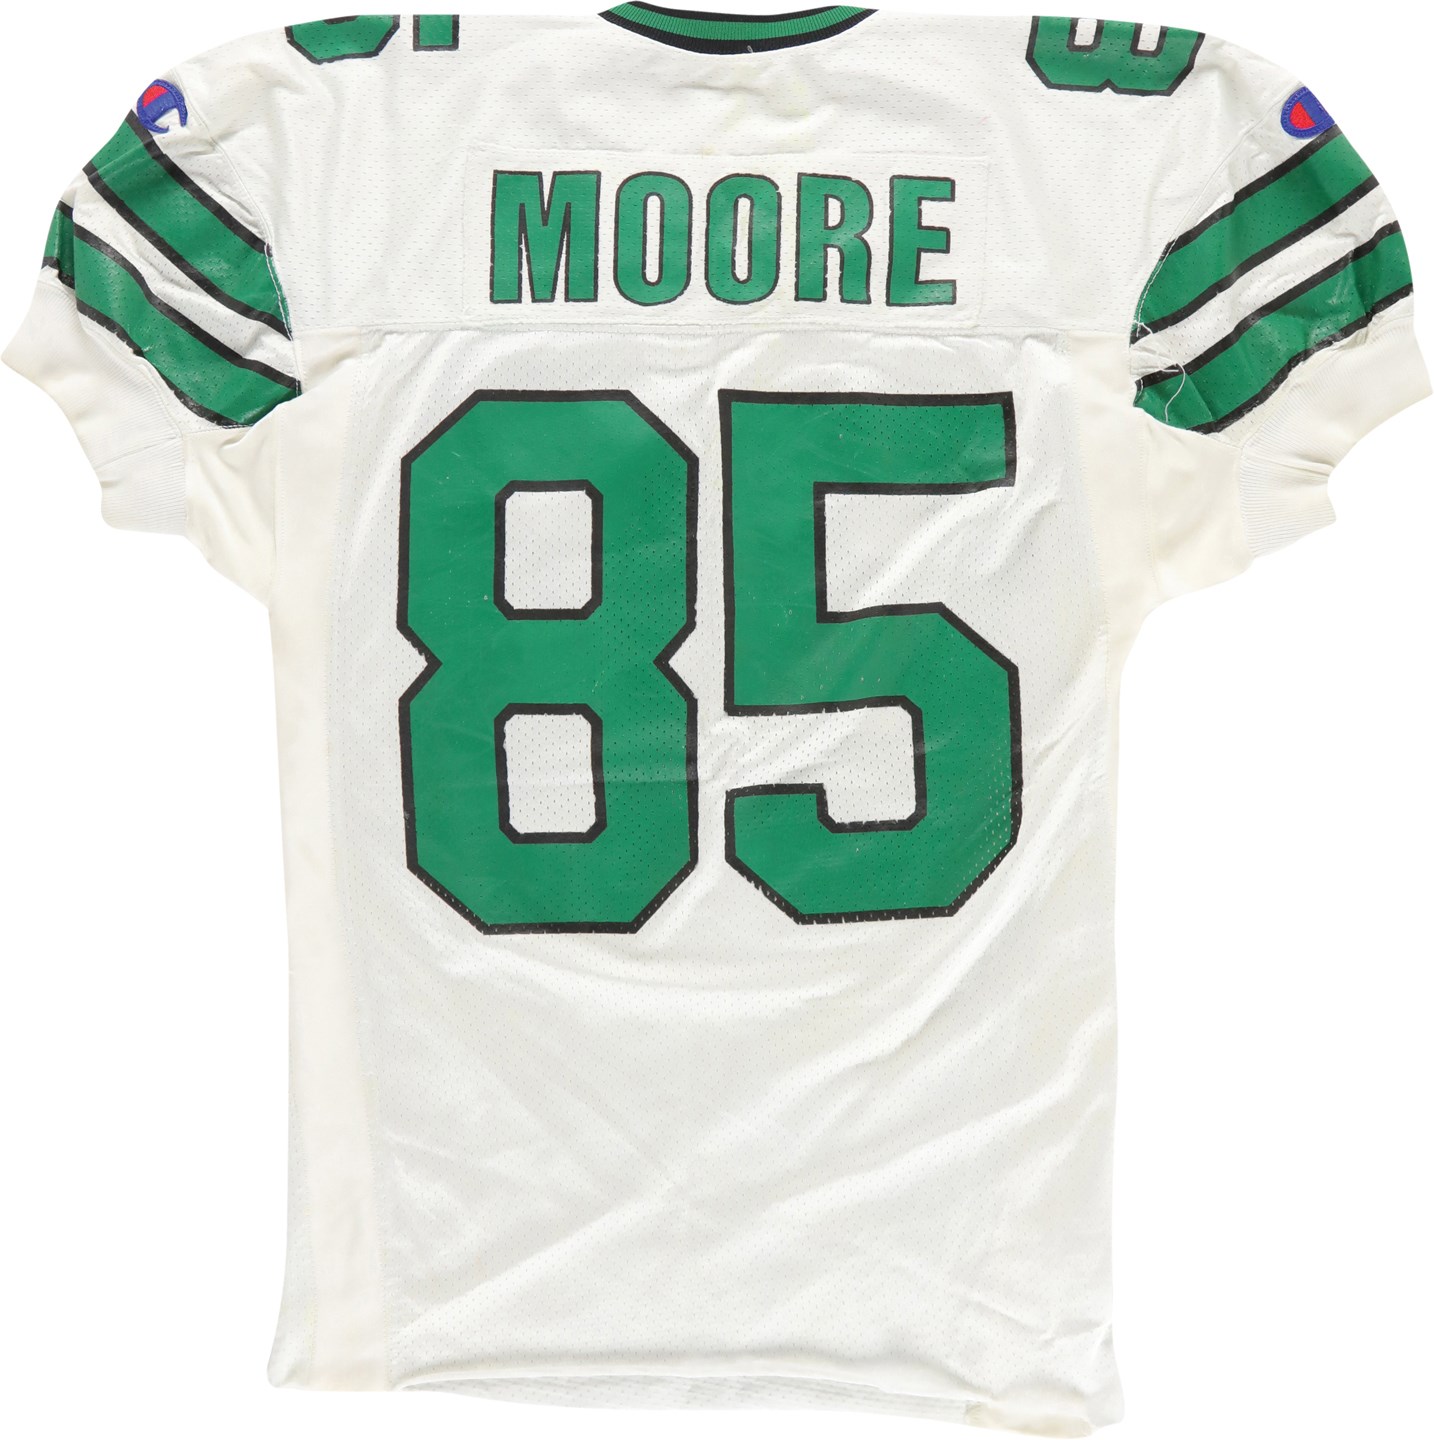 1994 Rob Moore New York Jets "Touchdown" Game Worn Jersey (Photo-Matched)